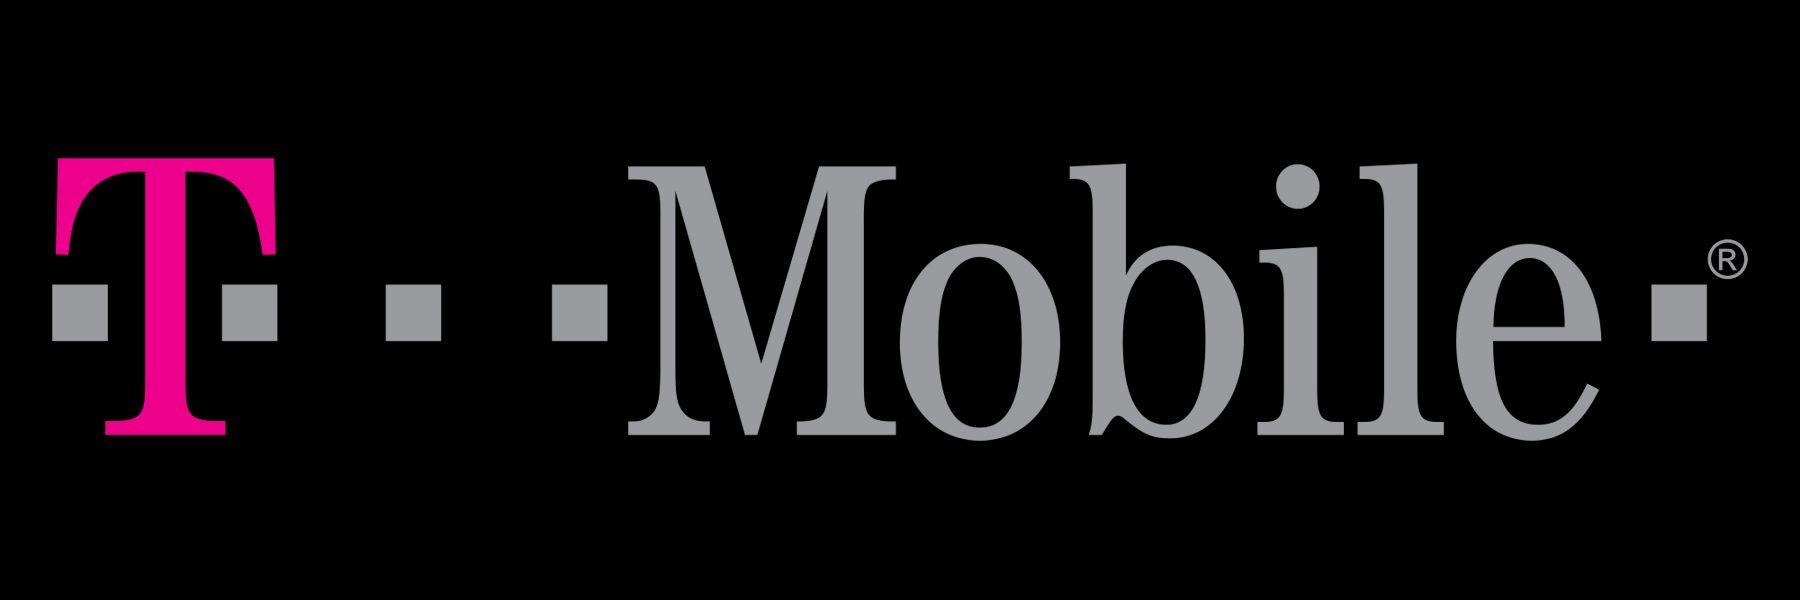 New T-Mobile Logo - T-Mobile Logo, T-Mobile Symbol, Meaning, History and Evolution